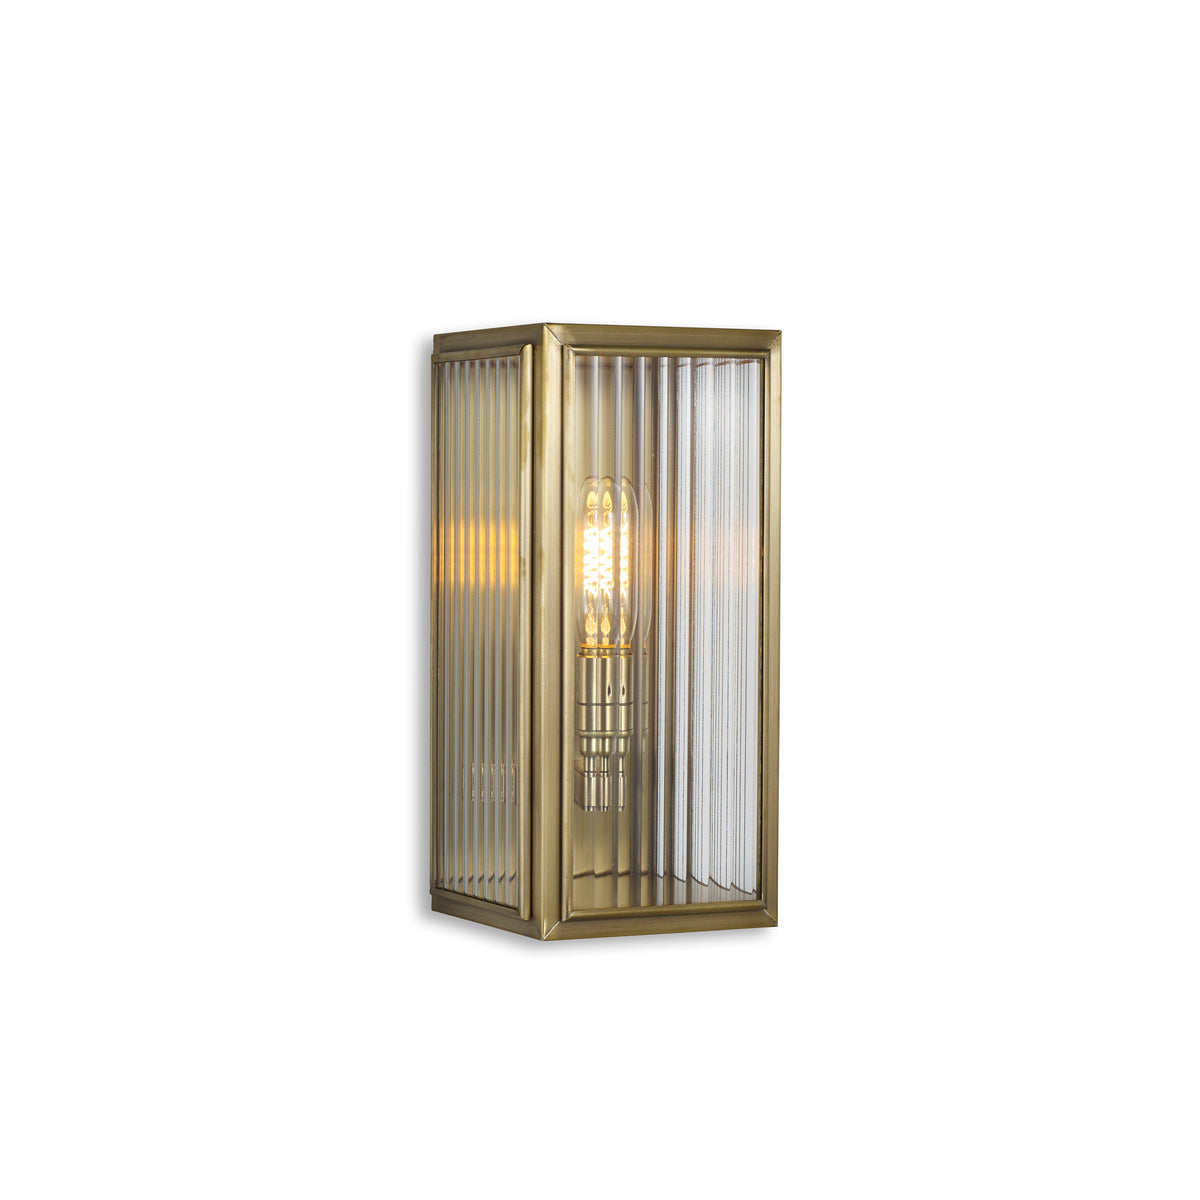 J Adams Ash Small Wall Lantern box light in antique brass with reeded glass